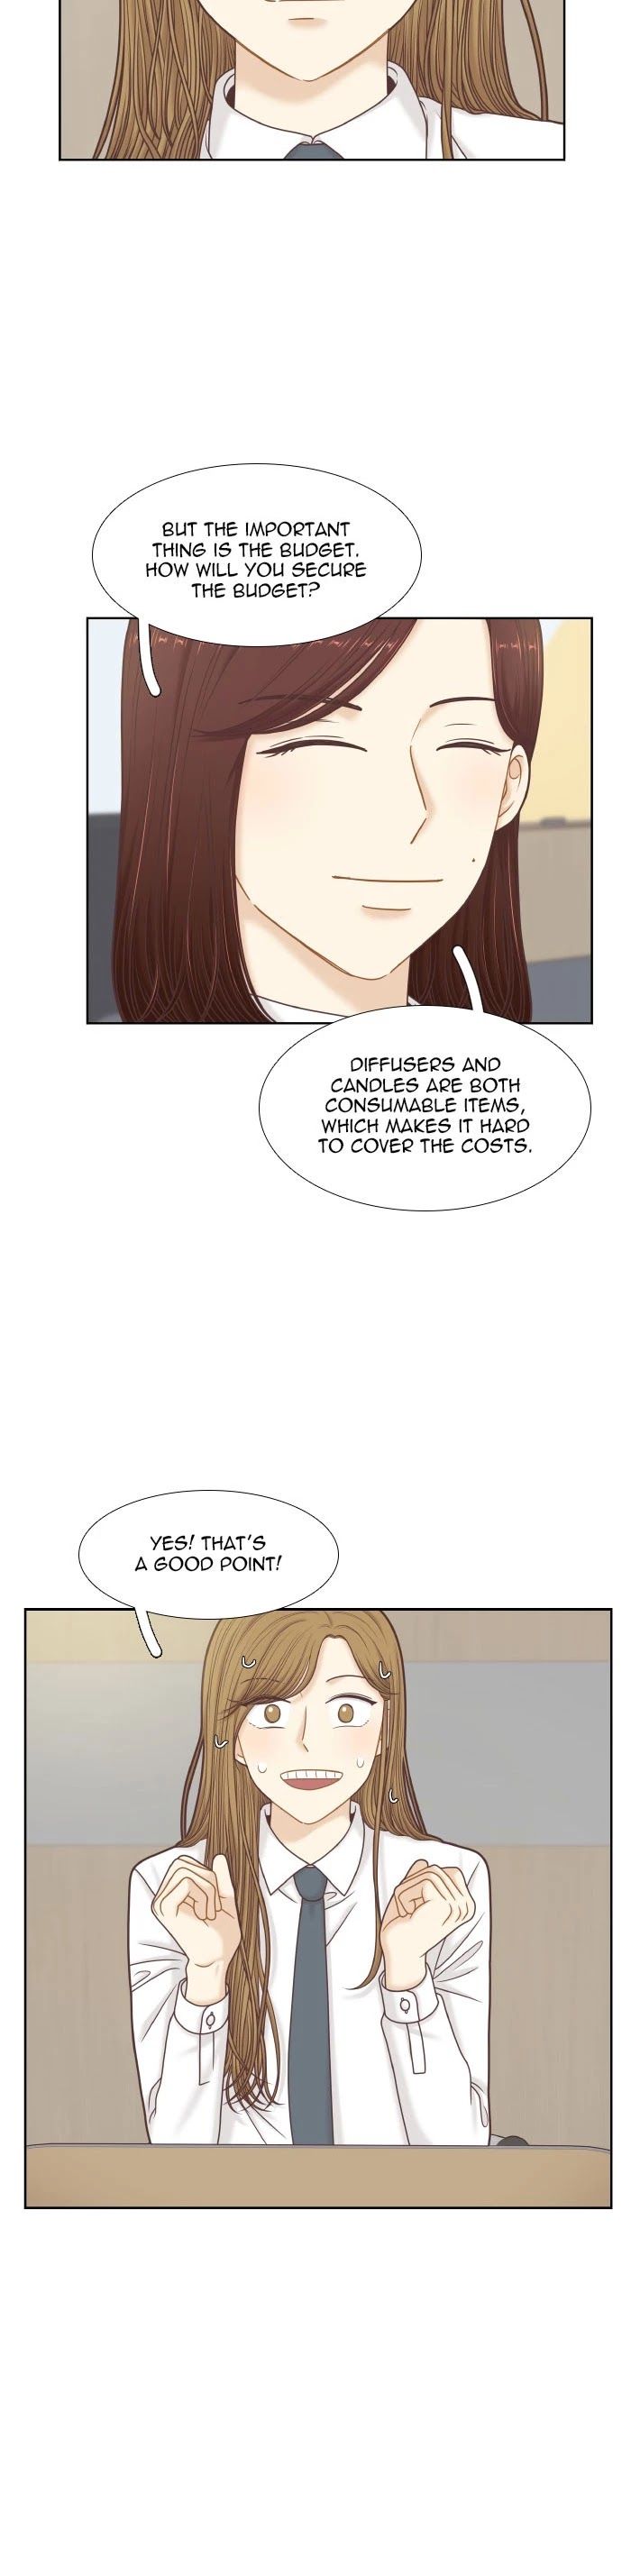 Girl’s World ( World of Girl ) Chapter 301 - Page 20